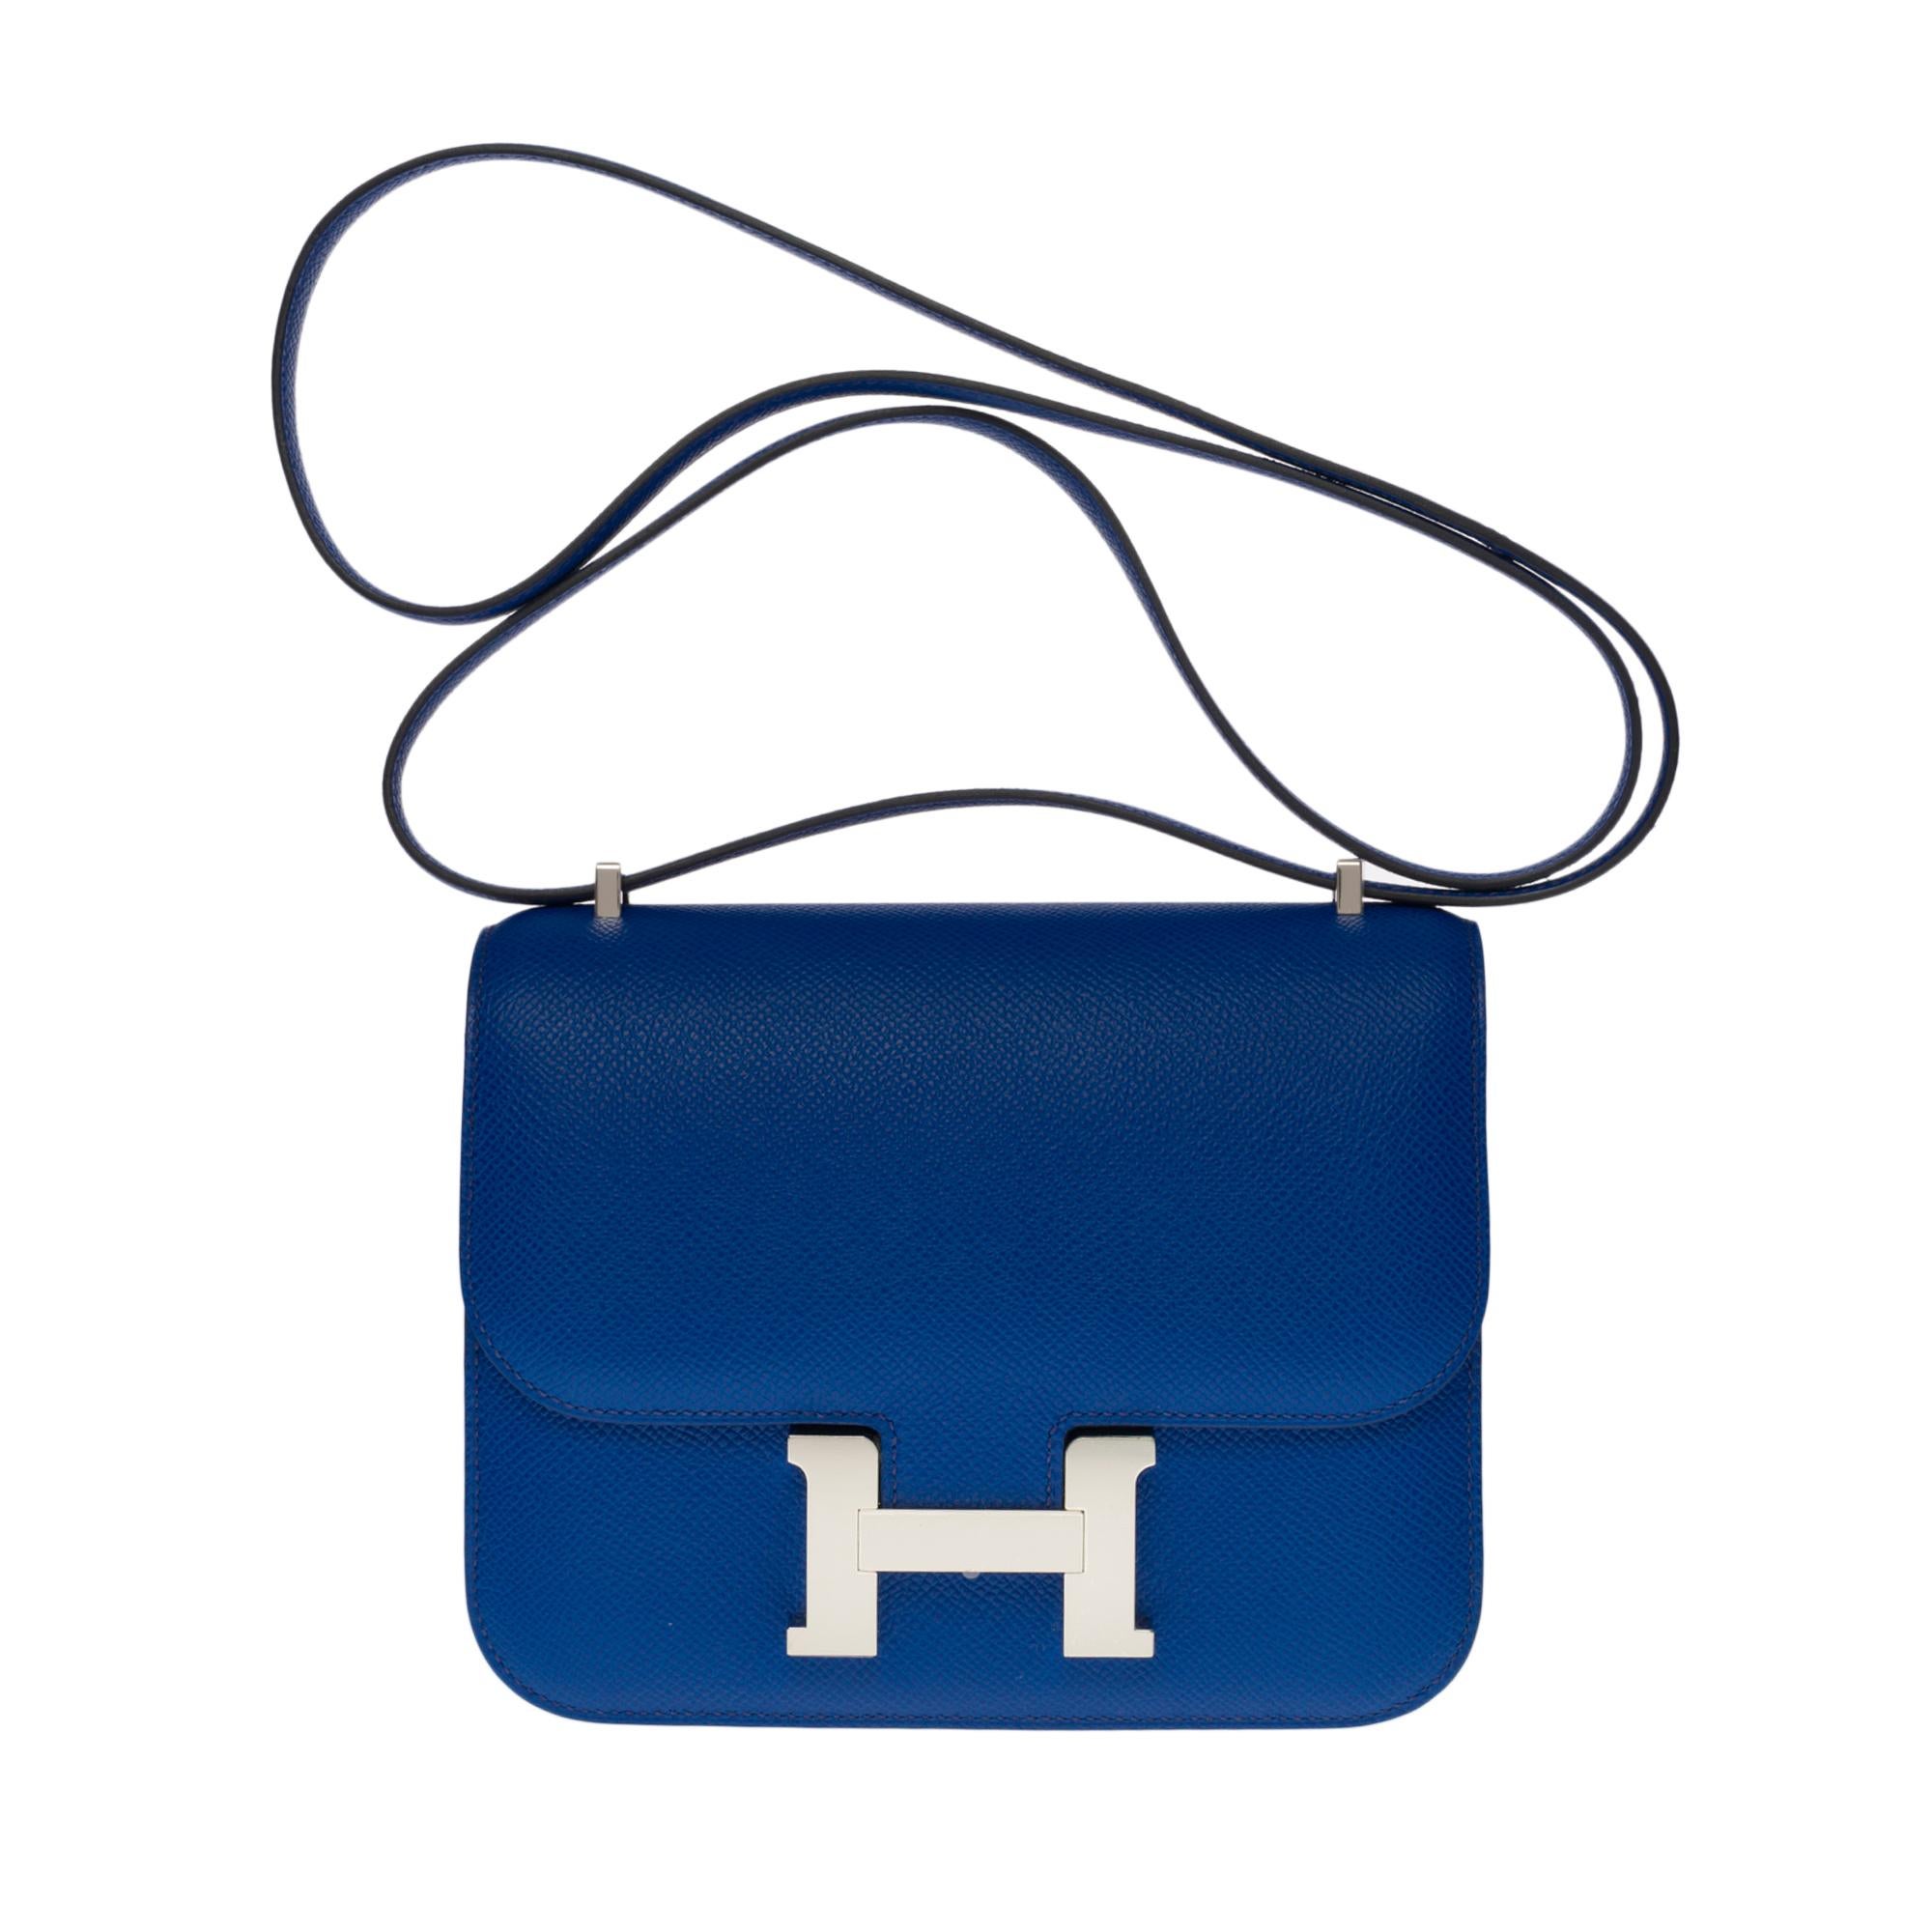 Stunning Hermès Mini Constance 18 in Epsom Blue Royal leather, palladium silver metal hardware, an epsom leather shoulder strap allowing a shoulder or shoulder strap

Logo closure on flap
Blue leather lining, two compartments, two patch